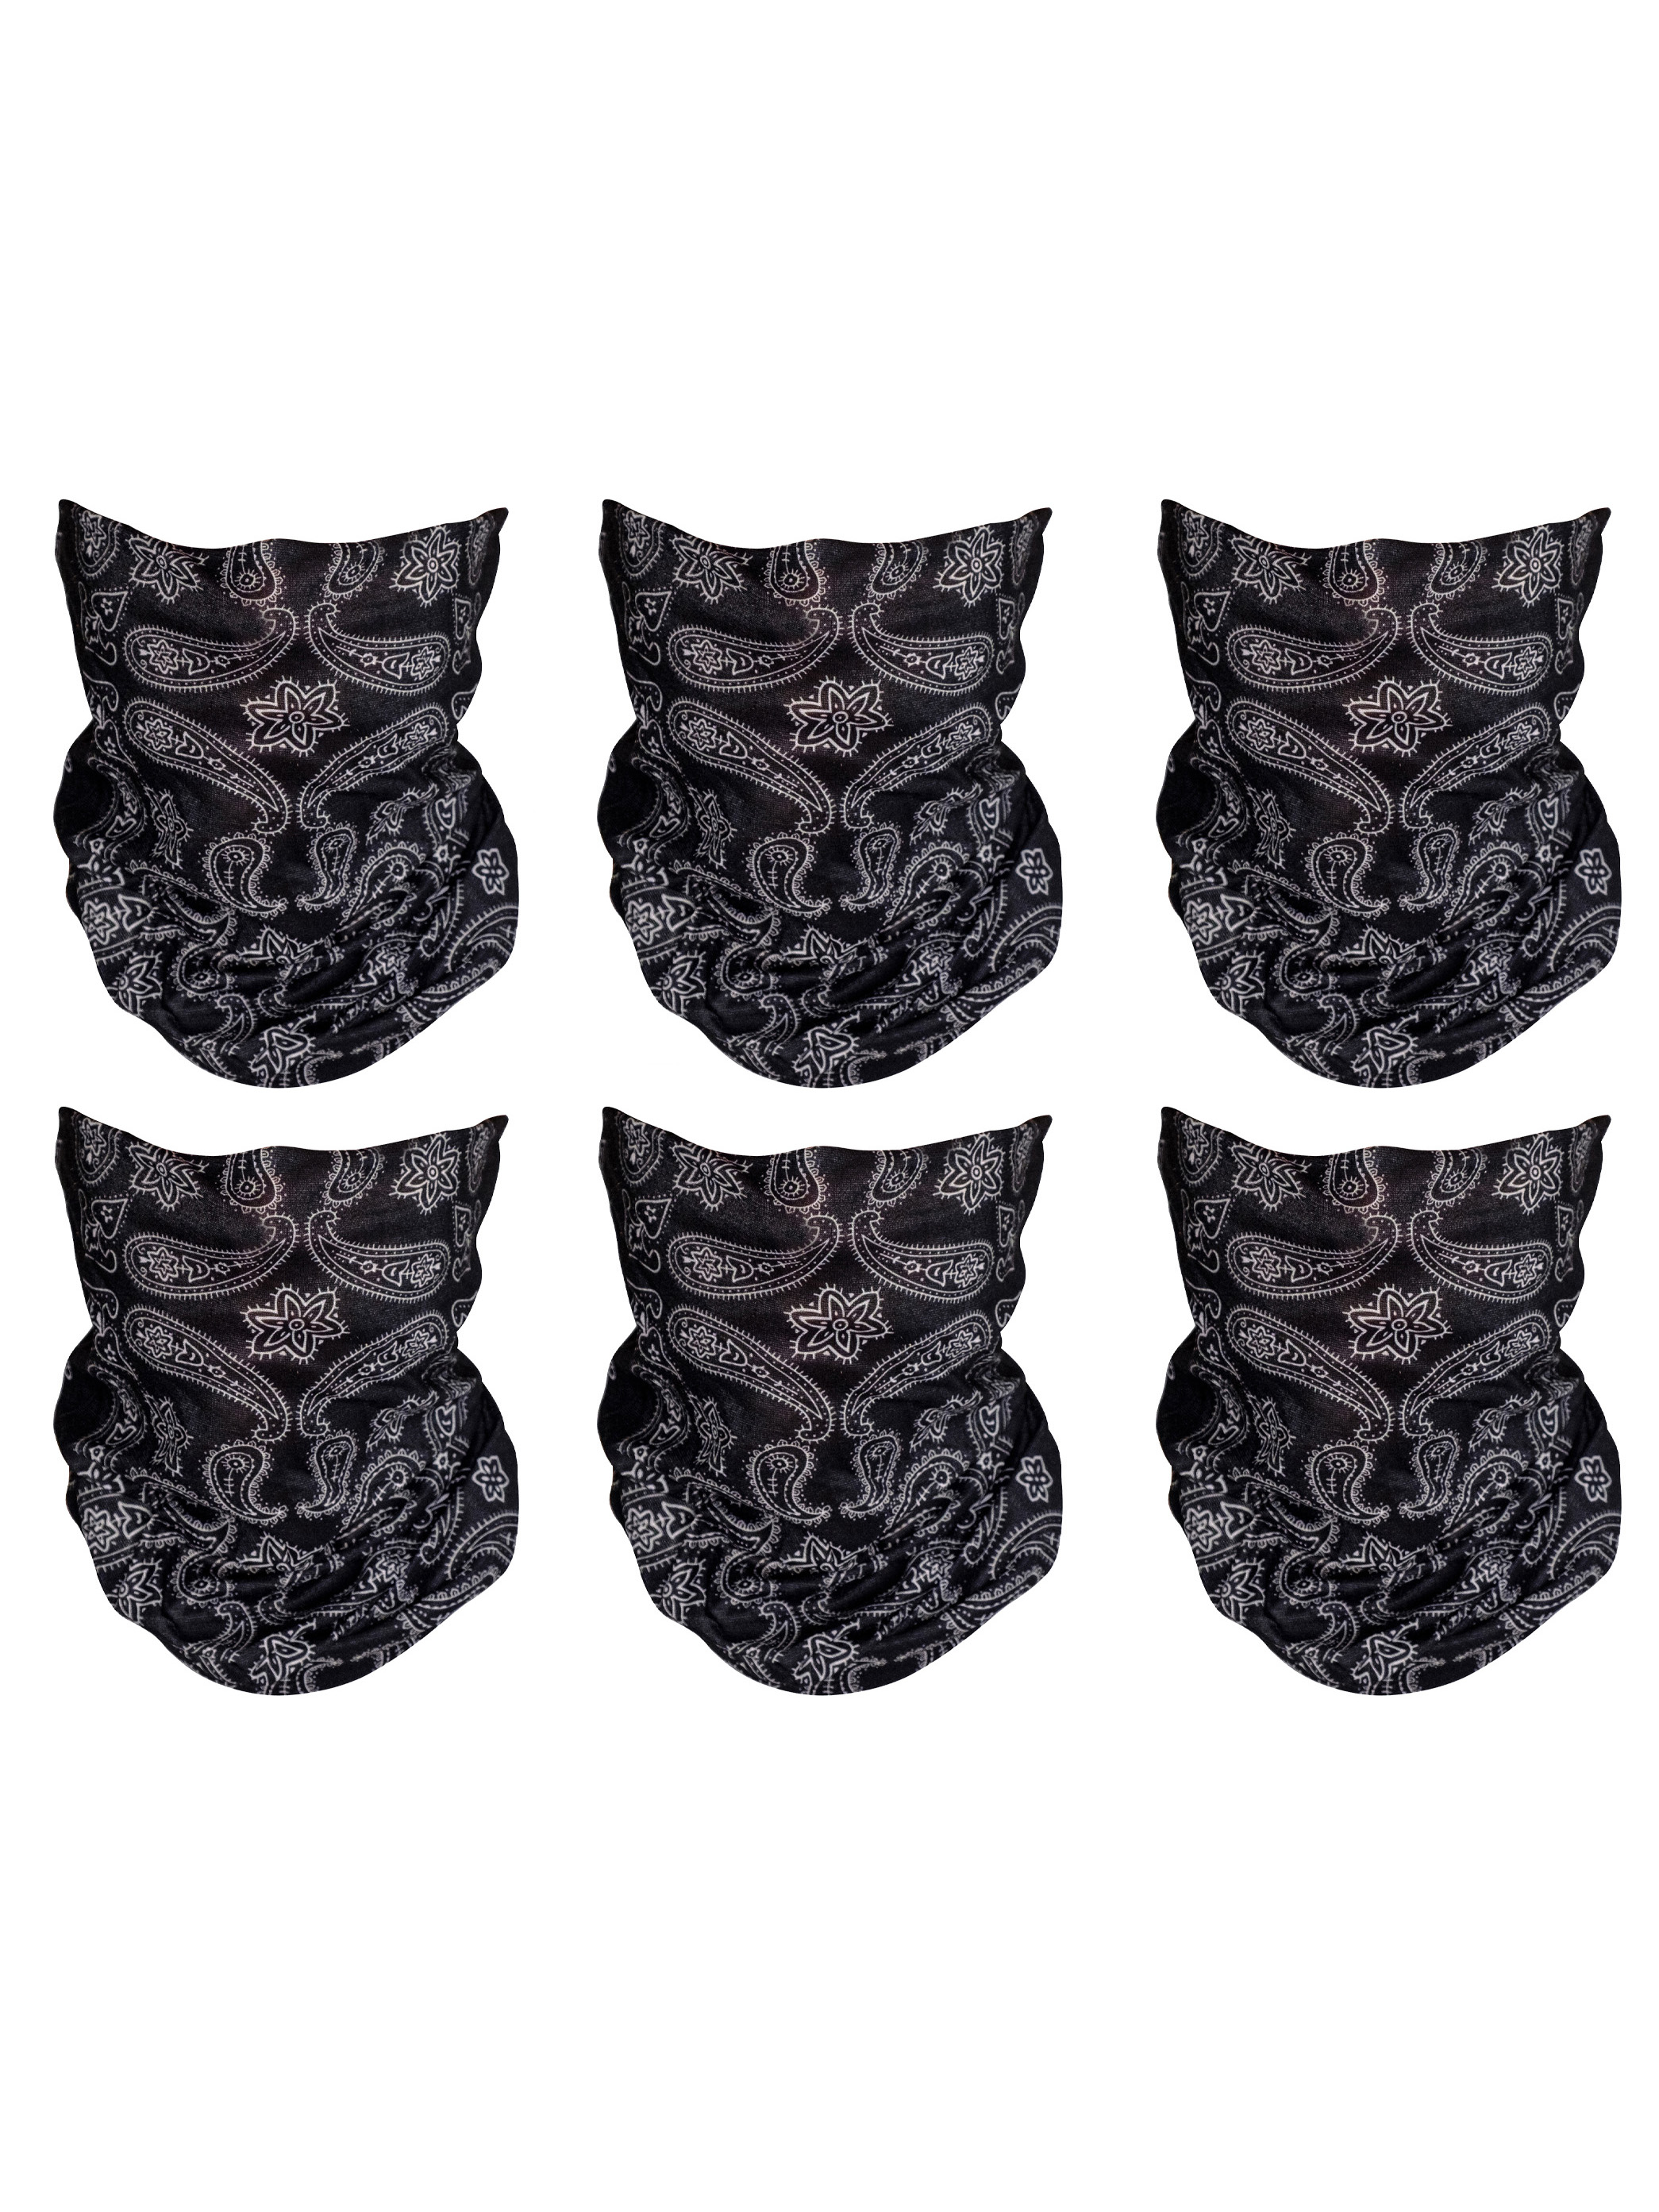 Top Headwear Face Covering Neck Gaiter - 6-Pack - Black Paisley - image 1 of 1